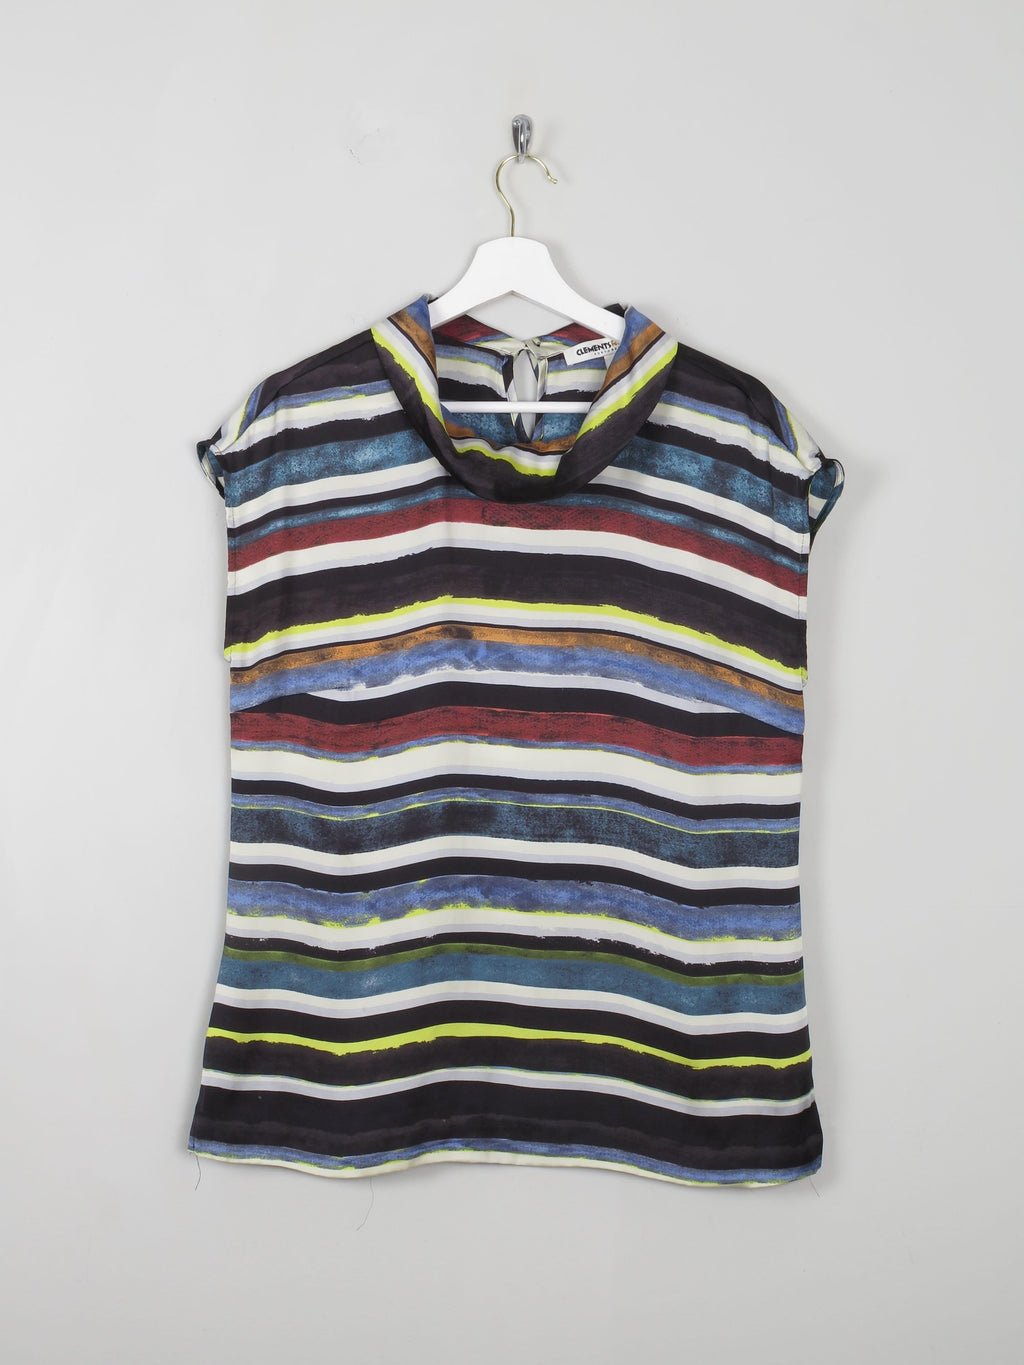 Women's Vintage Striped Sleeveless Blouse Clements Ribeiro M - The Harlequin